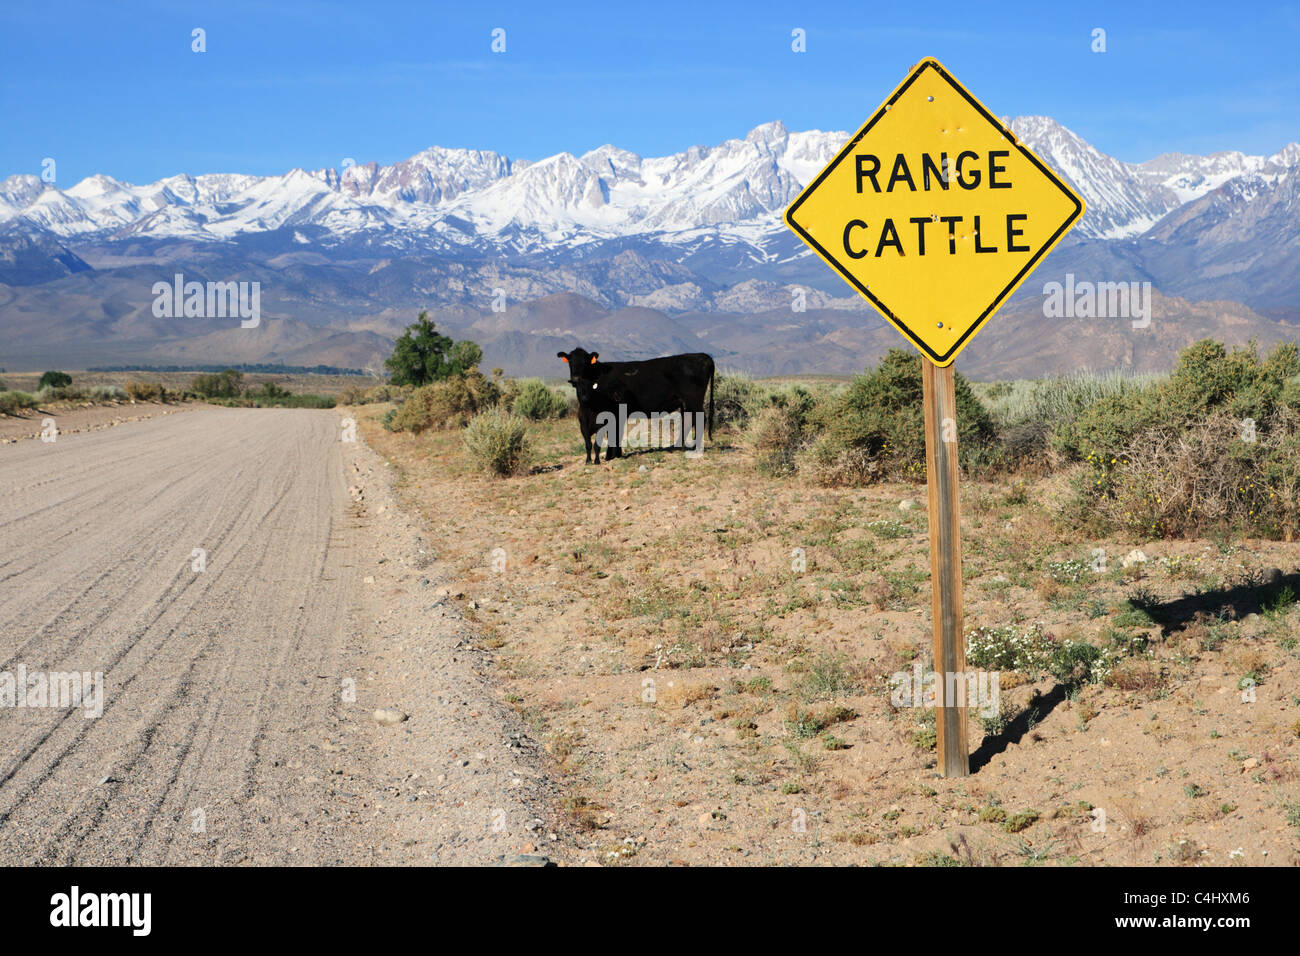 cattle range sign on the side of a dirt road with cattle on the edge and mountains in the distance Stock Photo